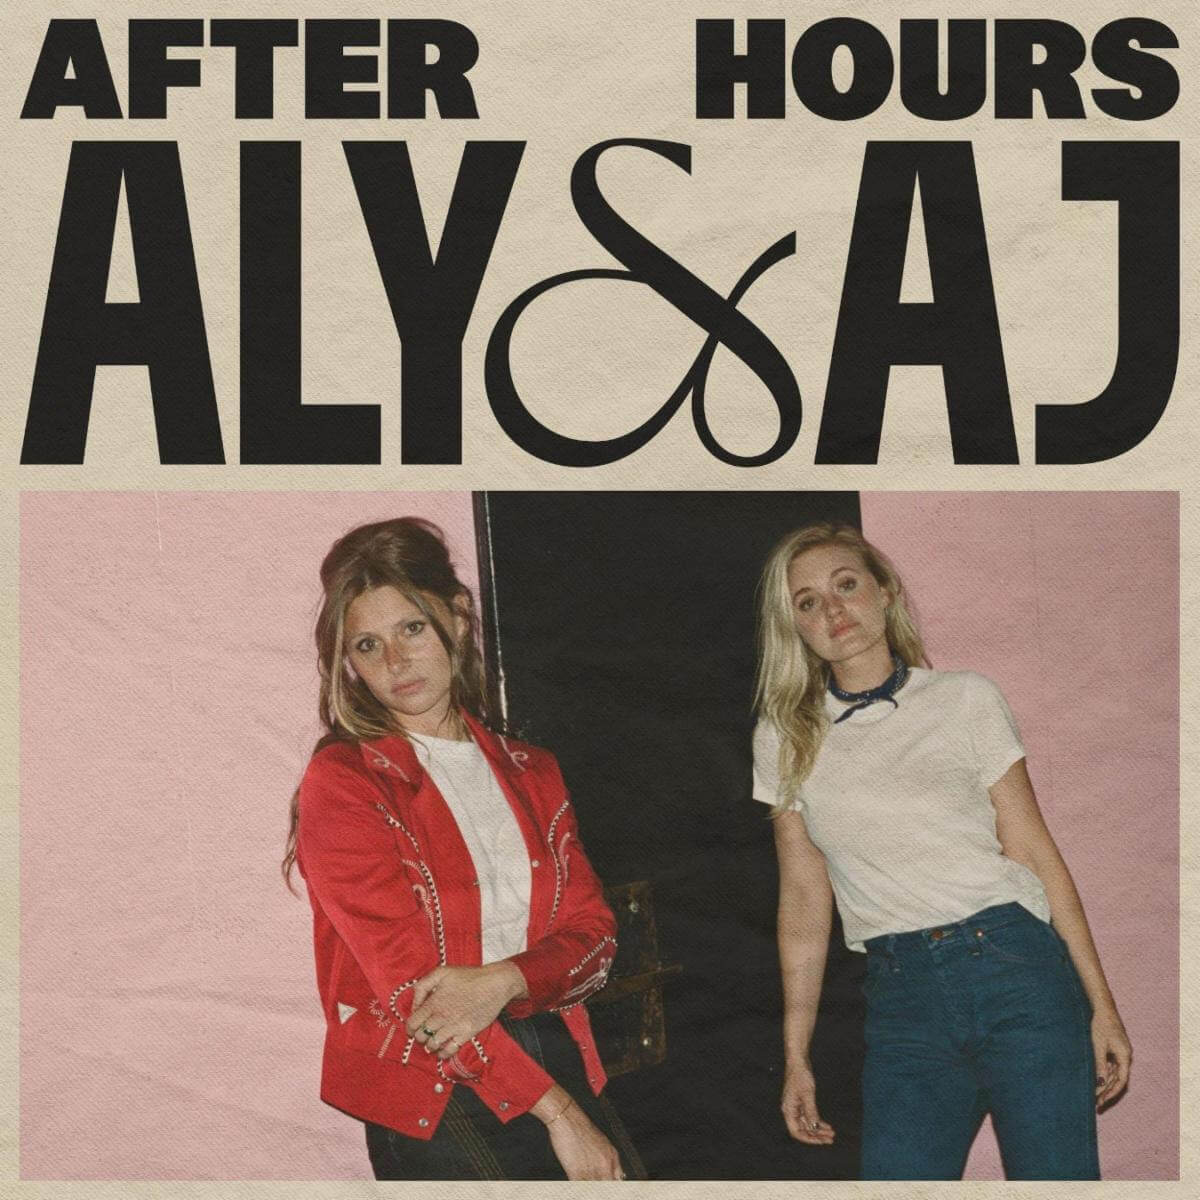 Aly & AJ release their new album With Love From on March 15, Today, they are sharing album-track “After Hours"